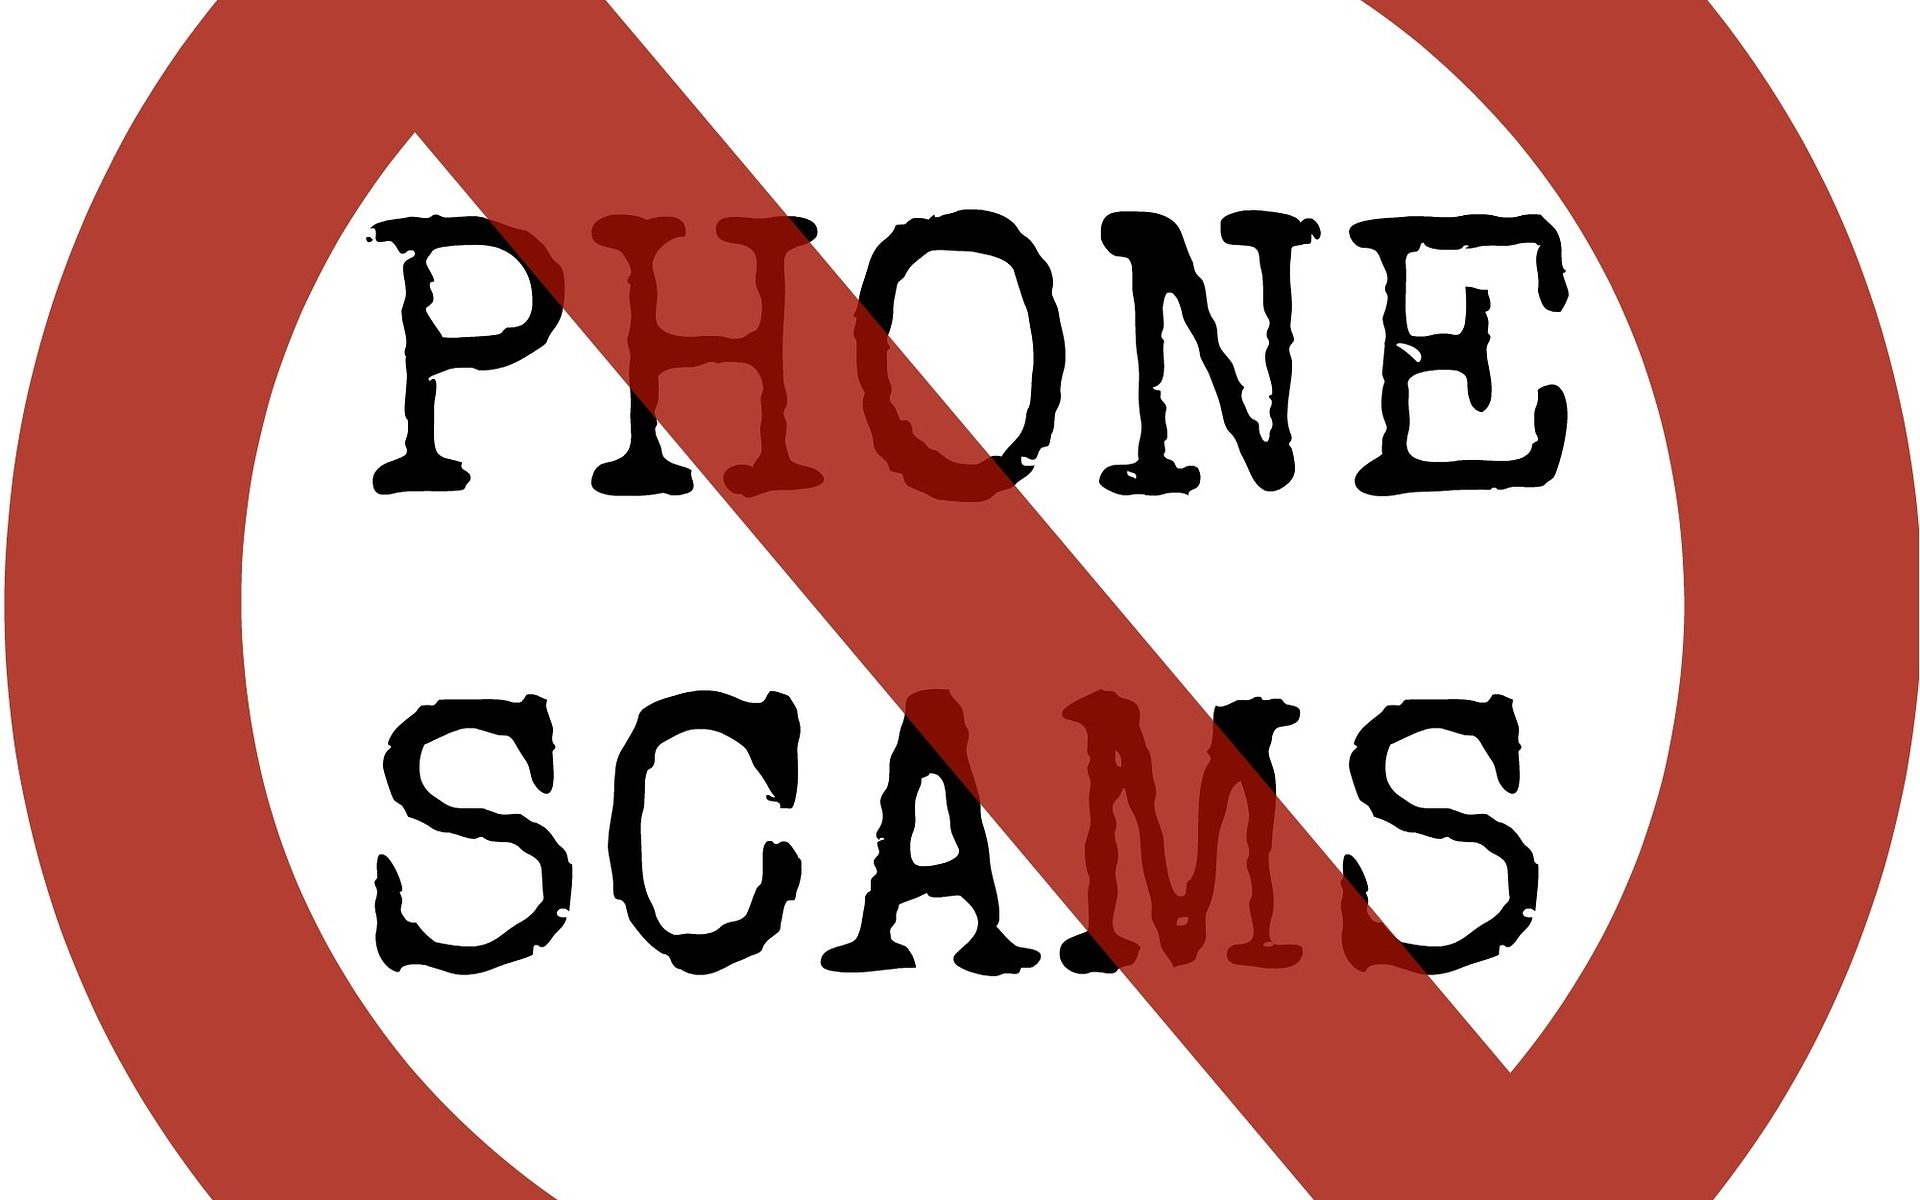 tghe words "phone scam" with a red circle and line through it